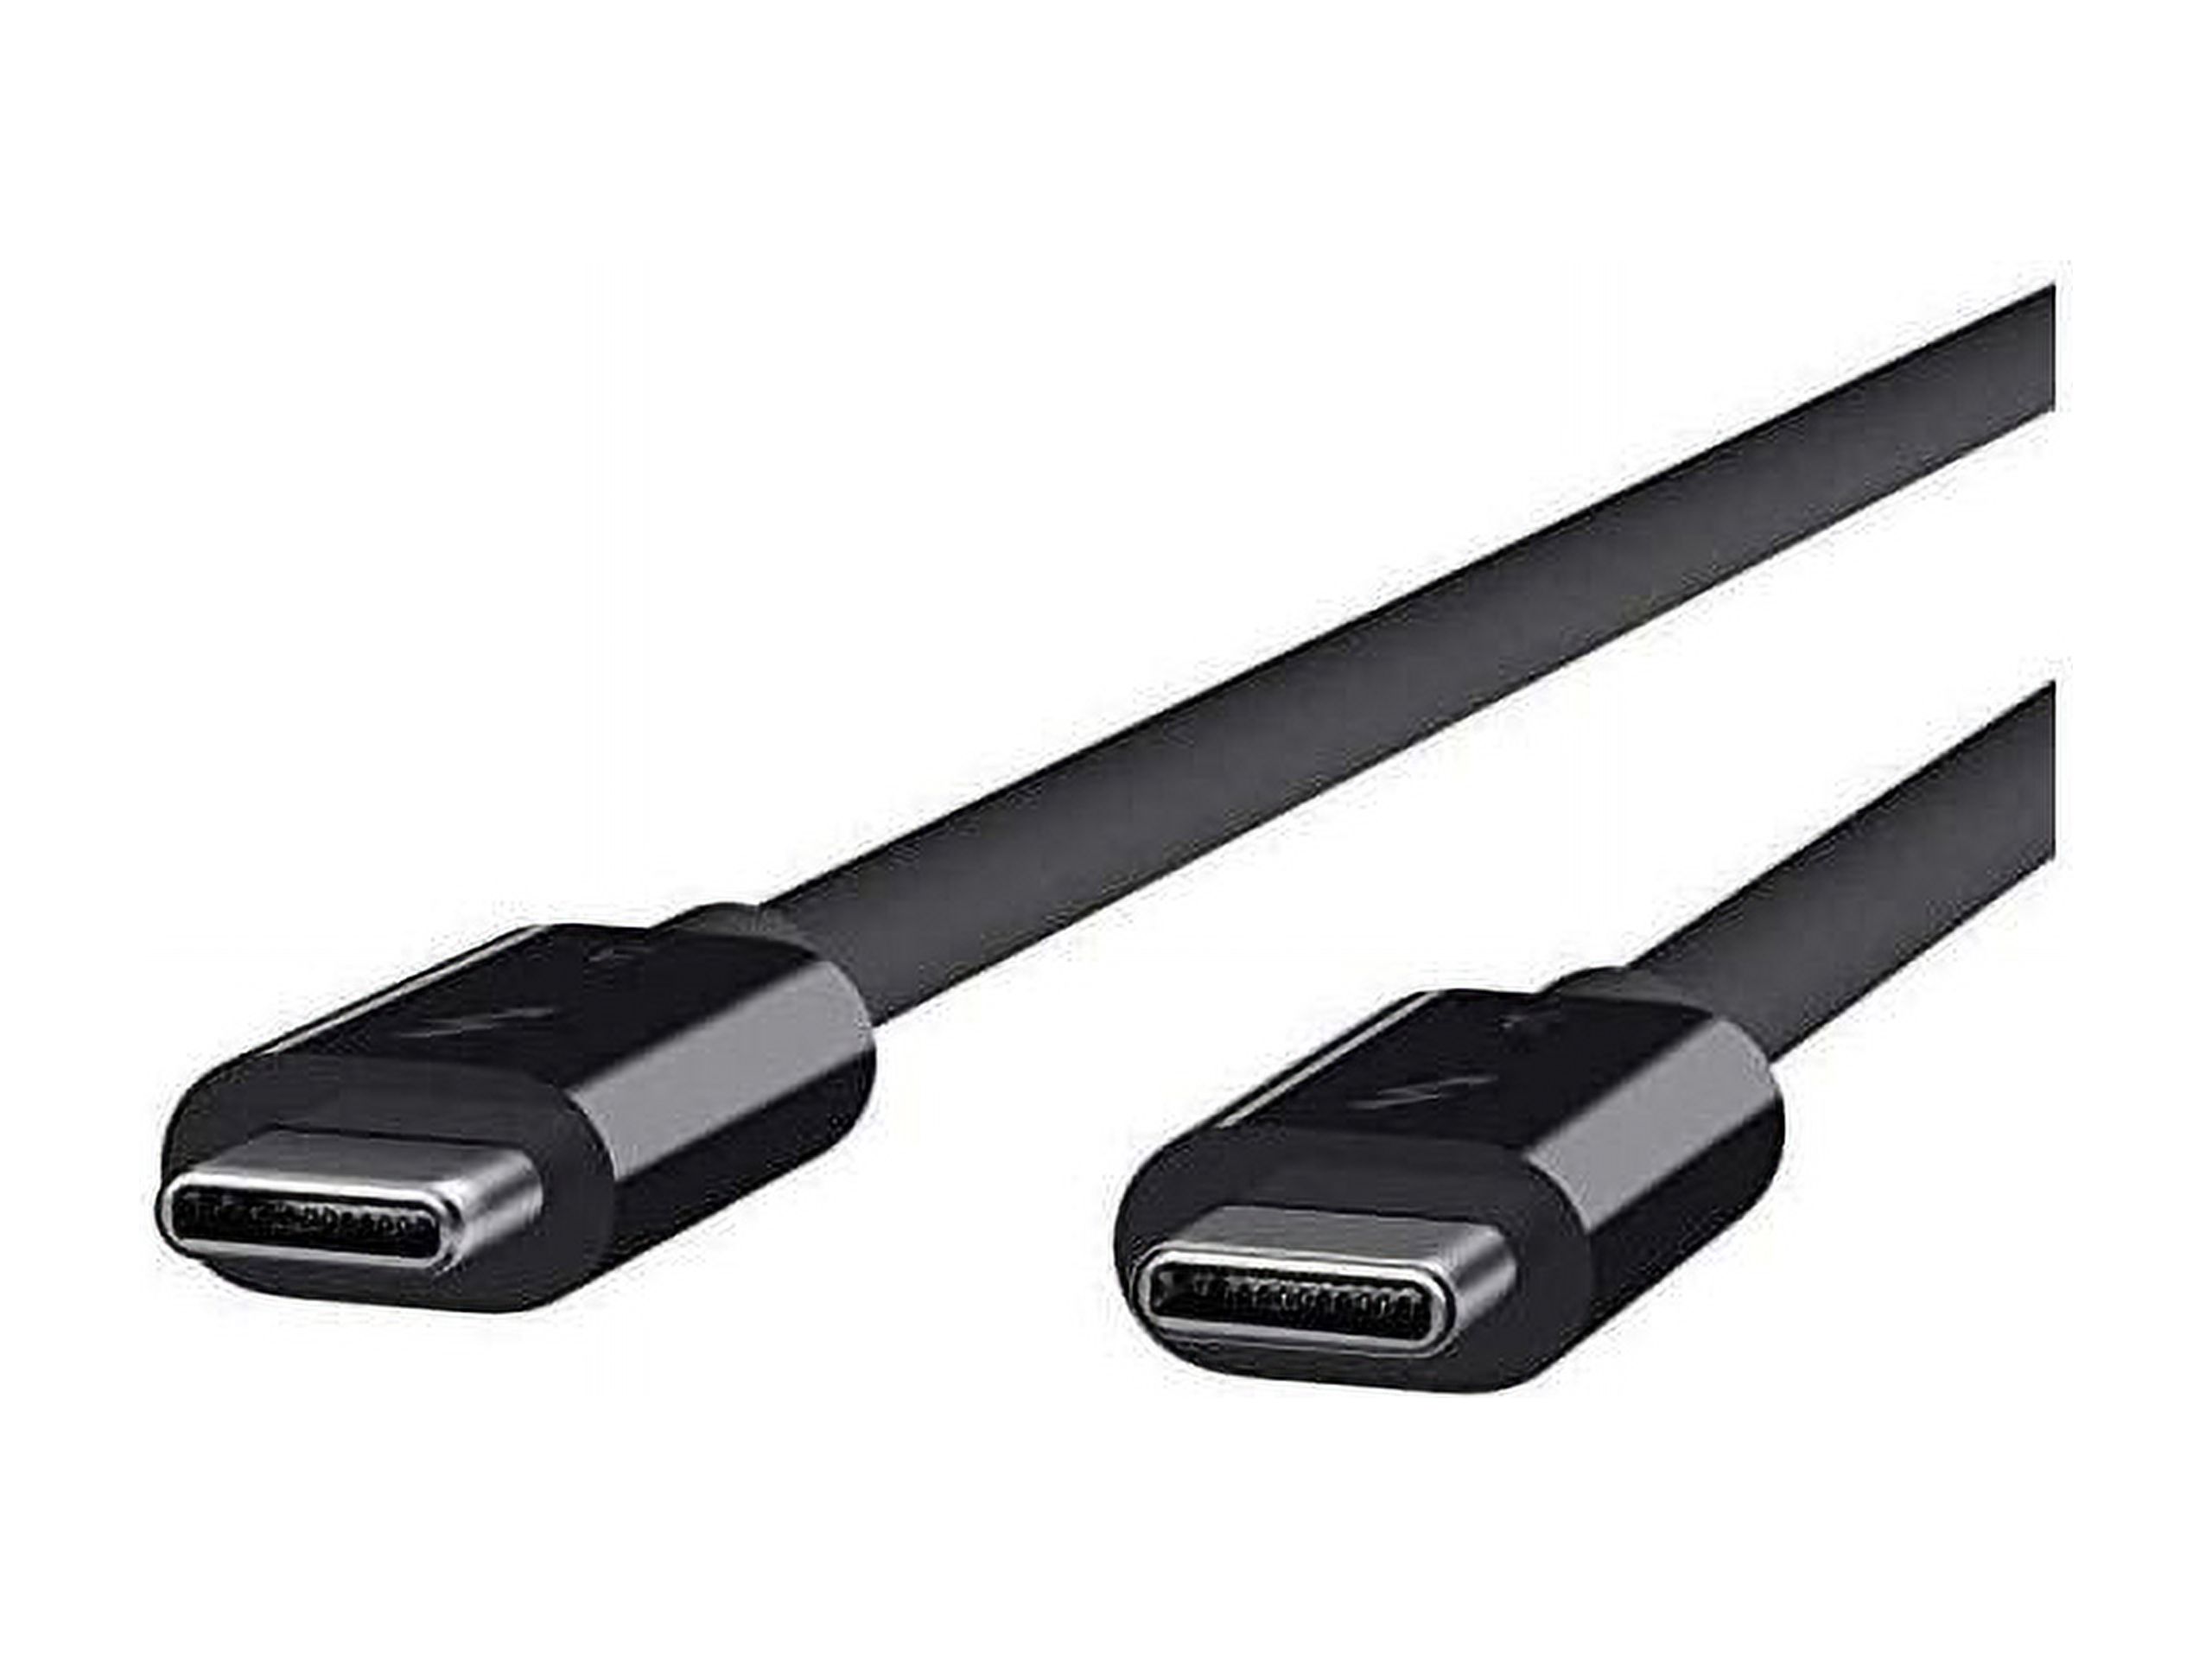 Belkin Thunderbolt 3 Cable, F2CD084 - image 5 of 12